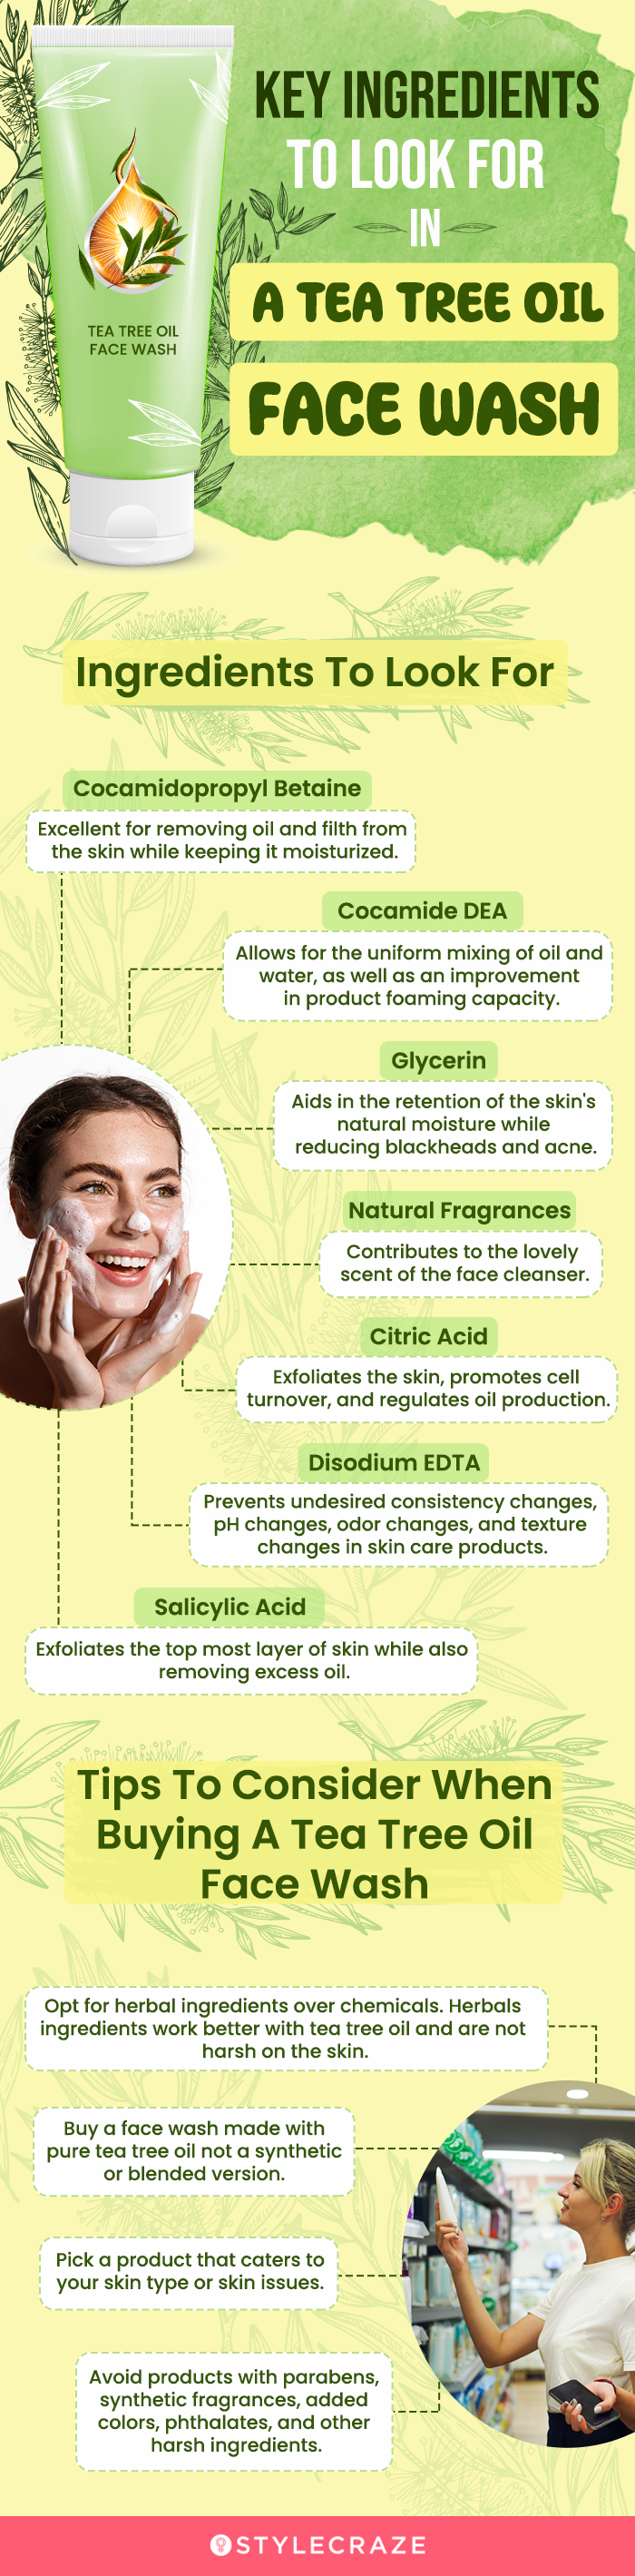 Key Ingredients To Look For In A Tea Tree Oil Face Wash (infographic)